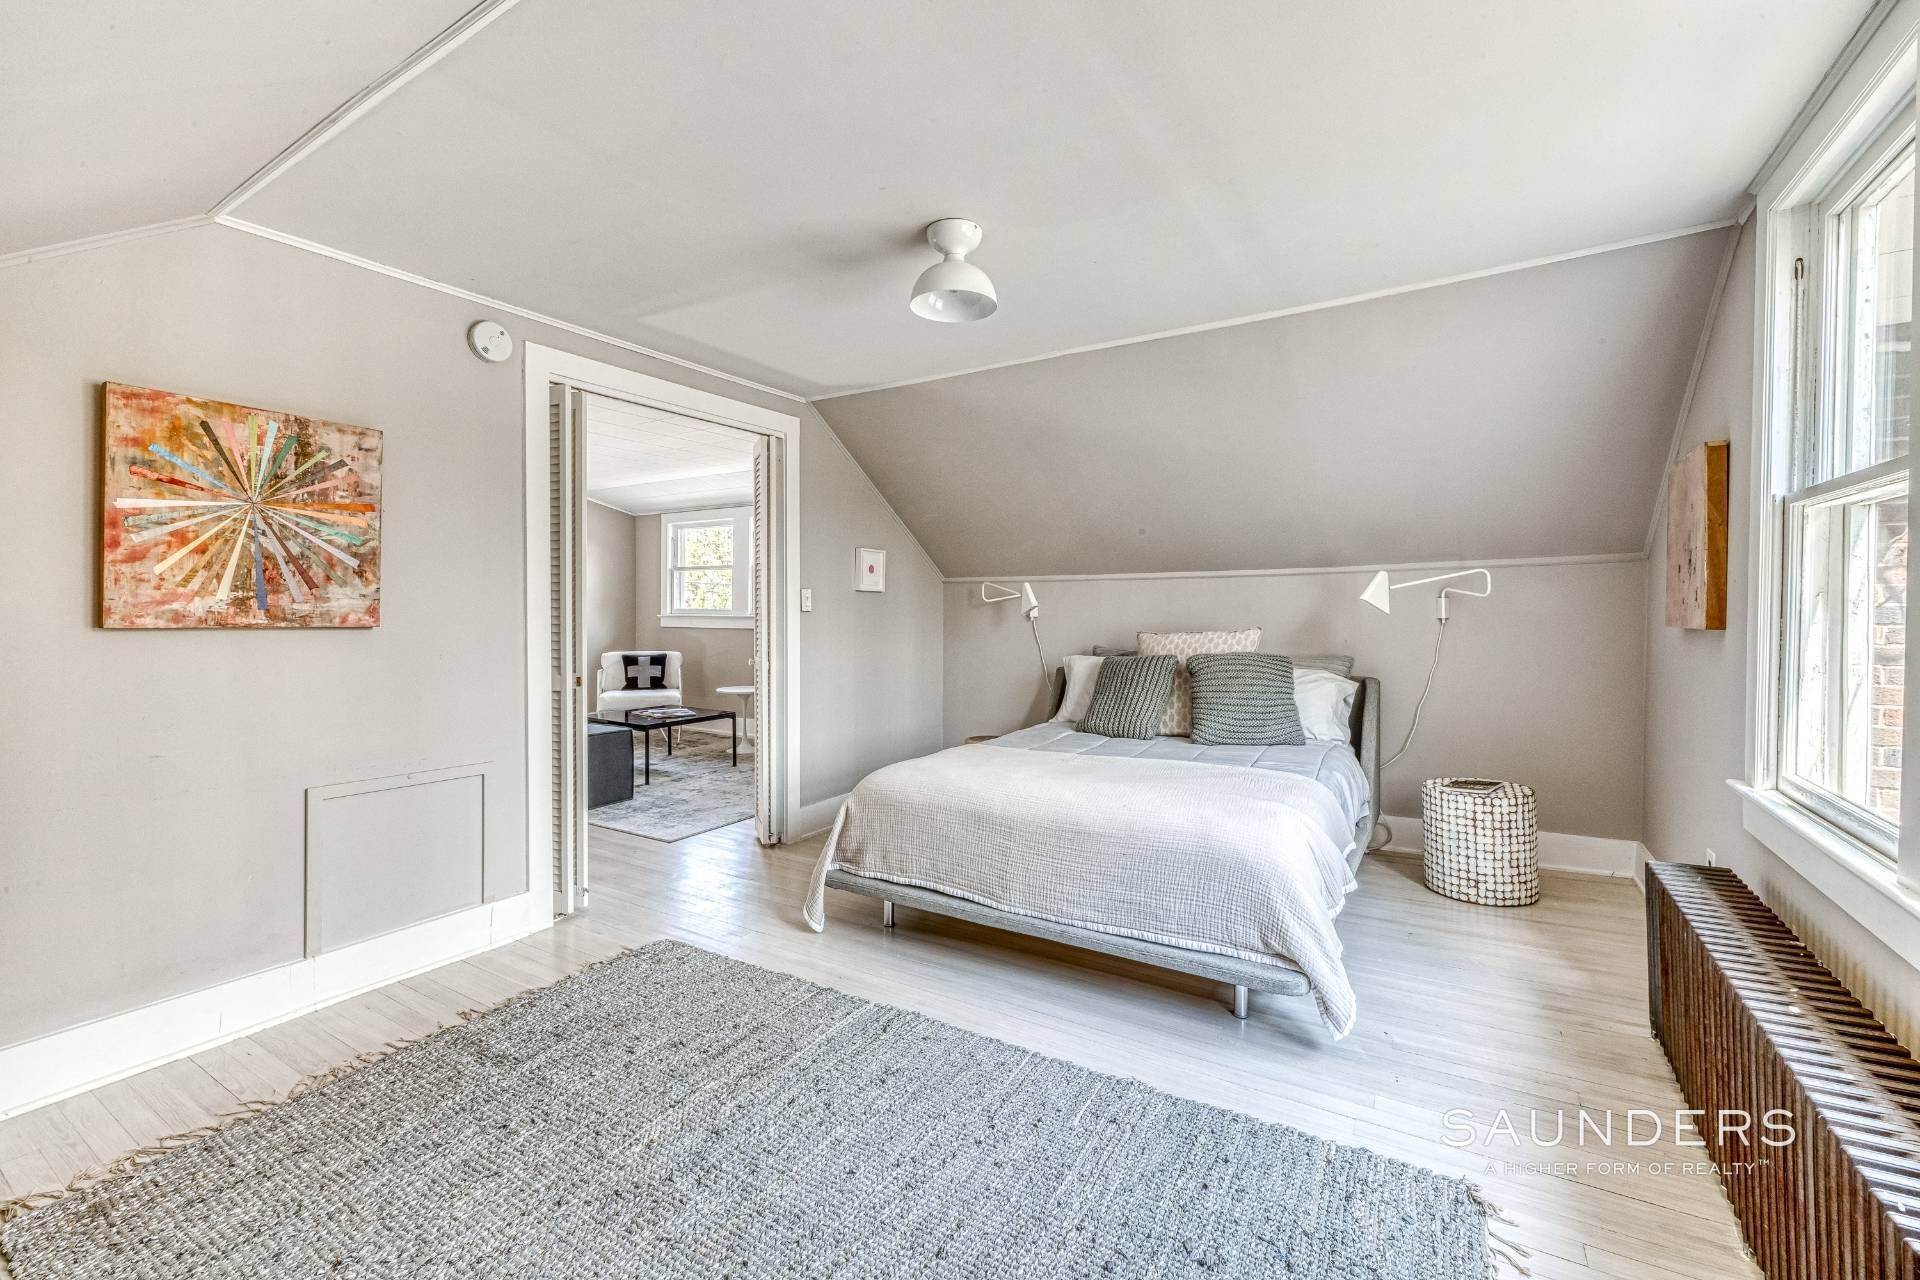 34. Single Family Homes for Sale at Shelter Island Renovated 1931 Bungalow With Pool 23 Smith Street, Shelter Island, NY 11964